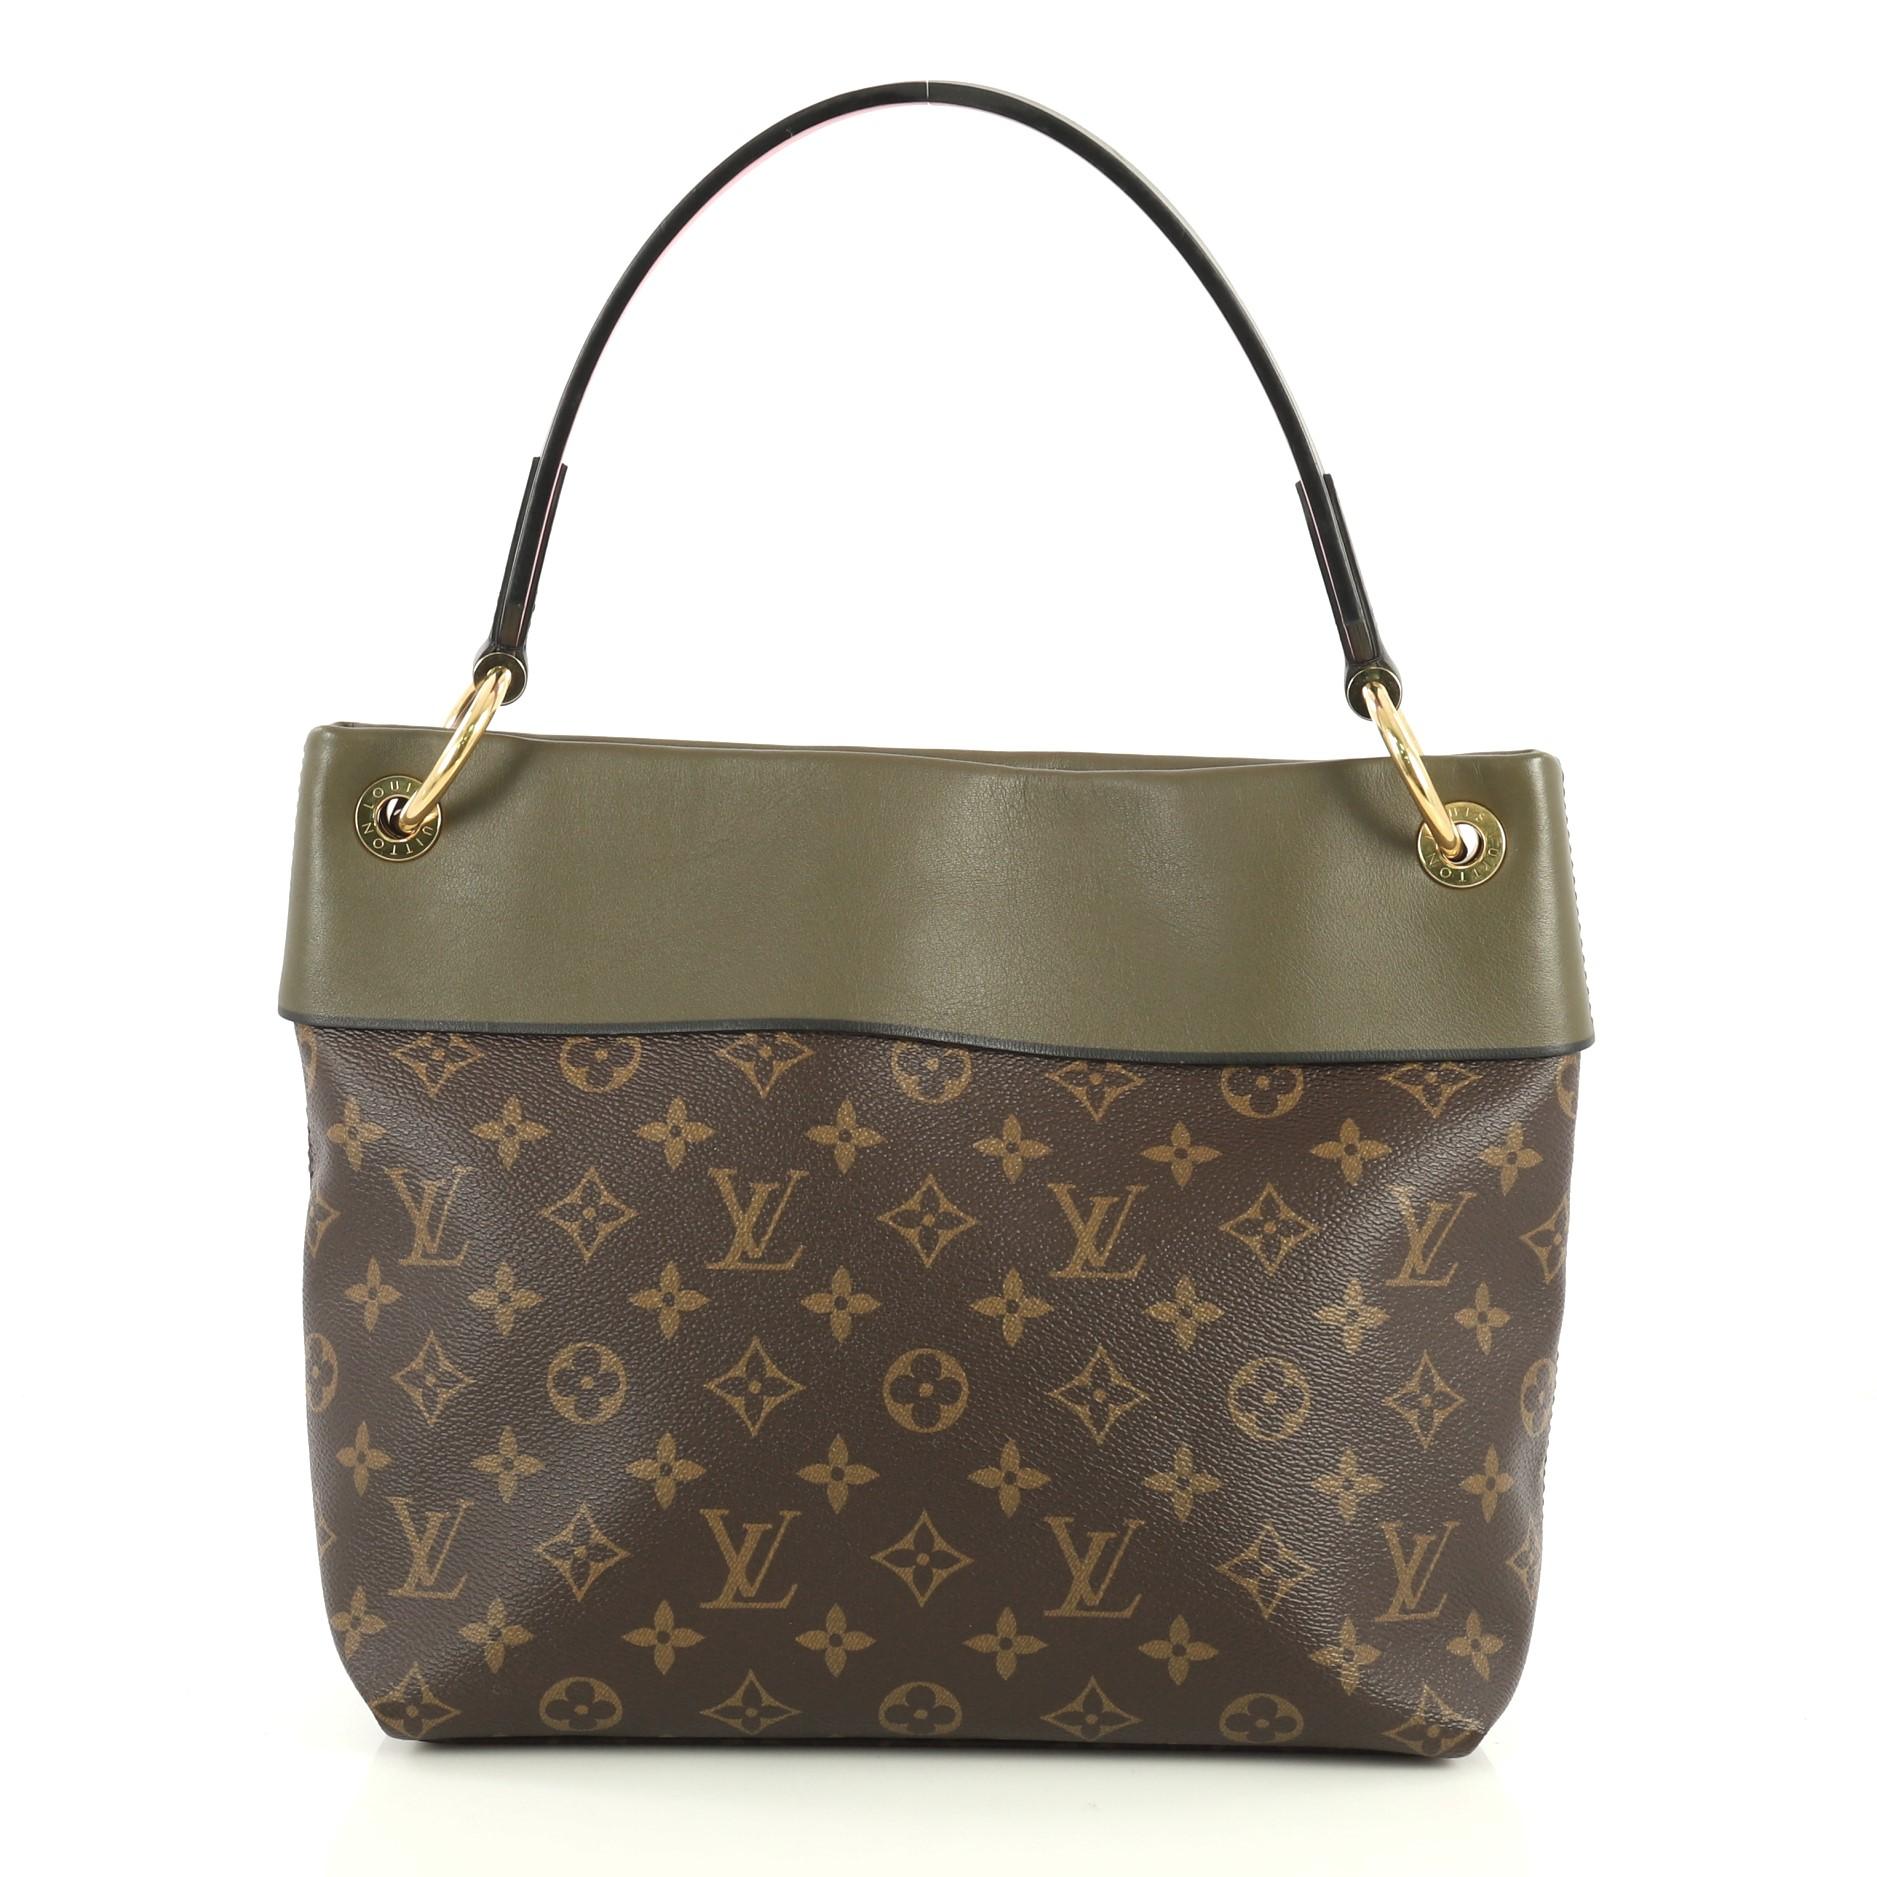 Black Louis Vuitton Tuileries Besace Bag Monogram Canvas With Leather 